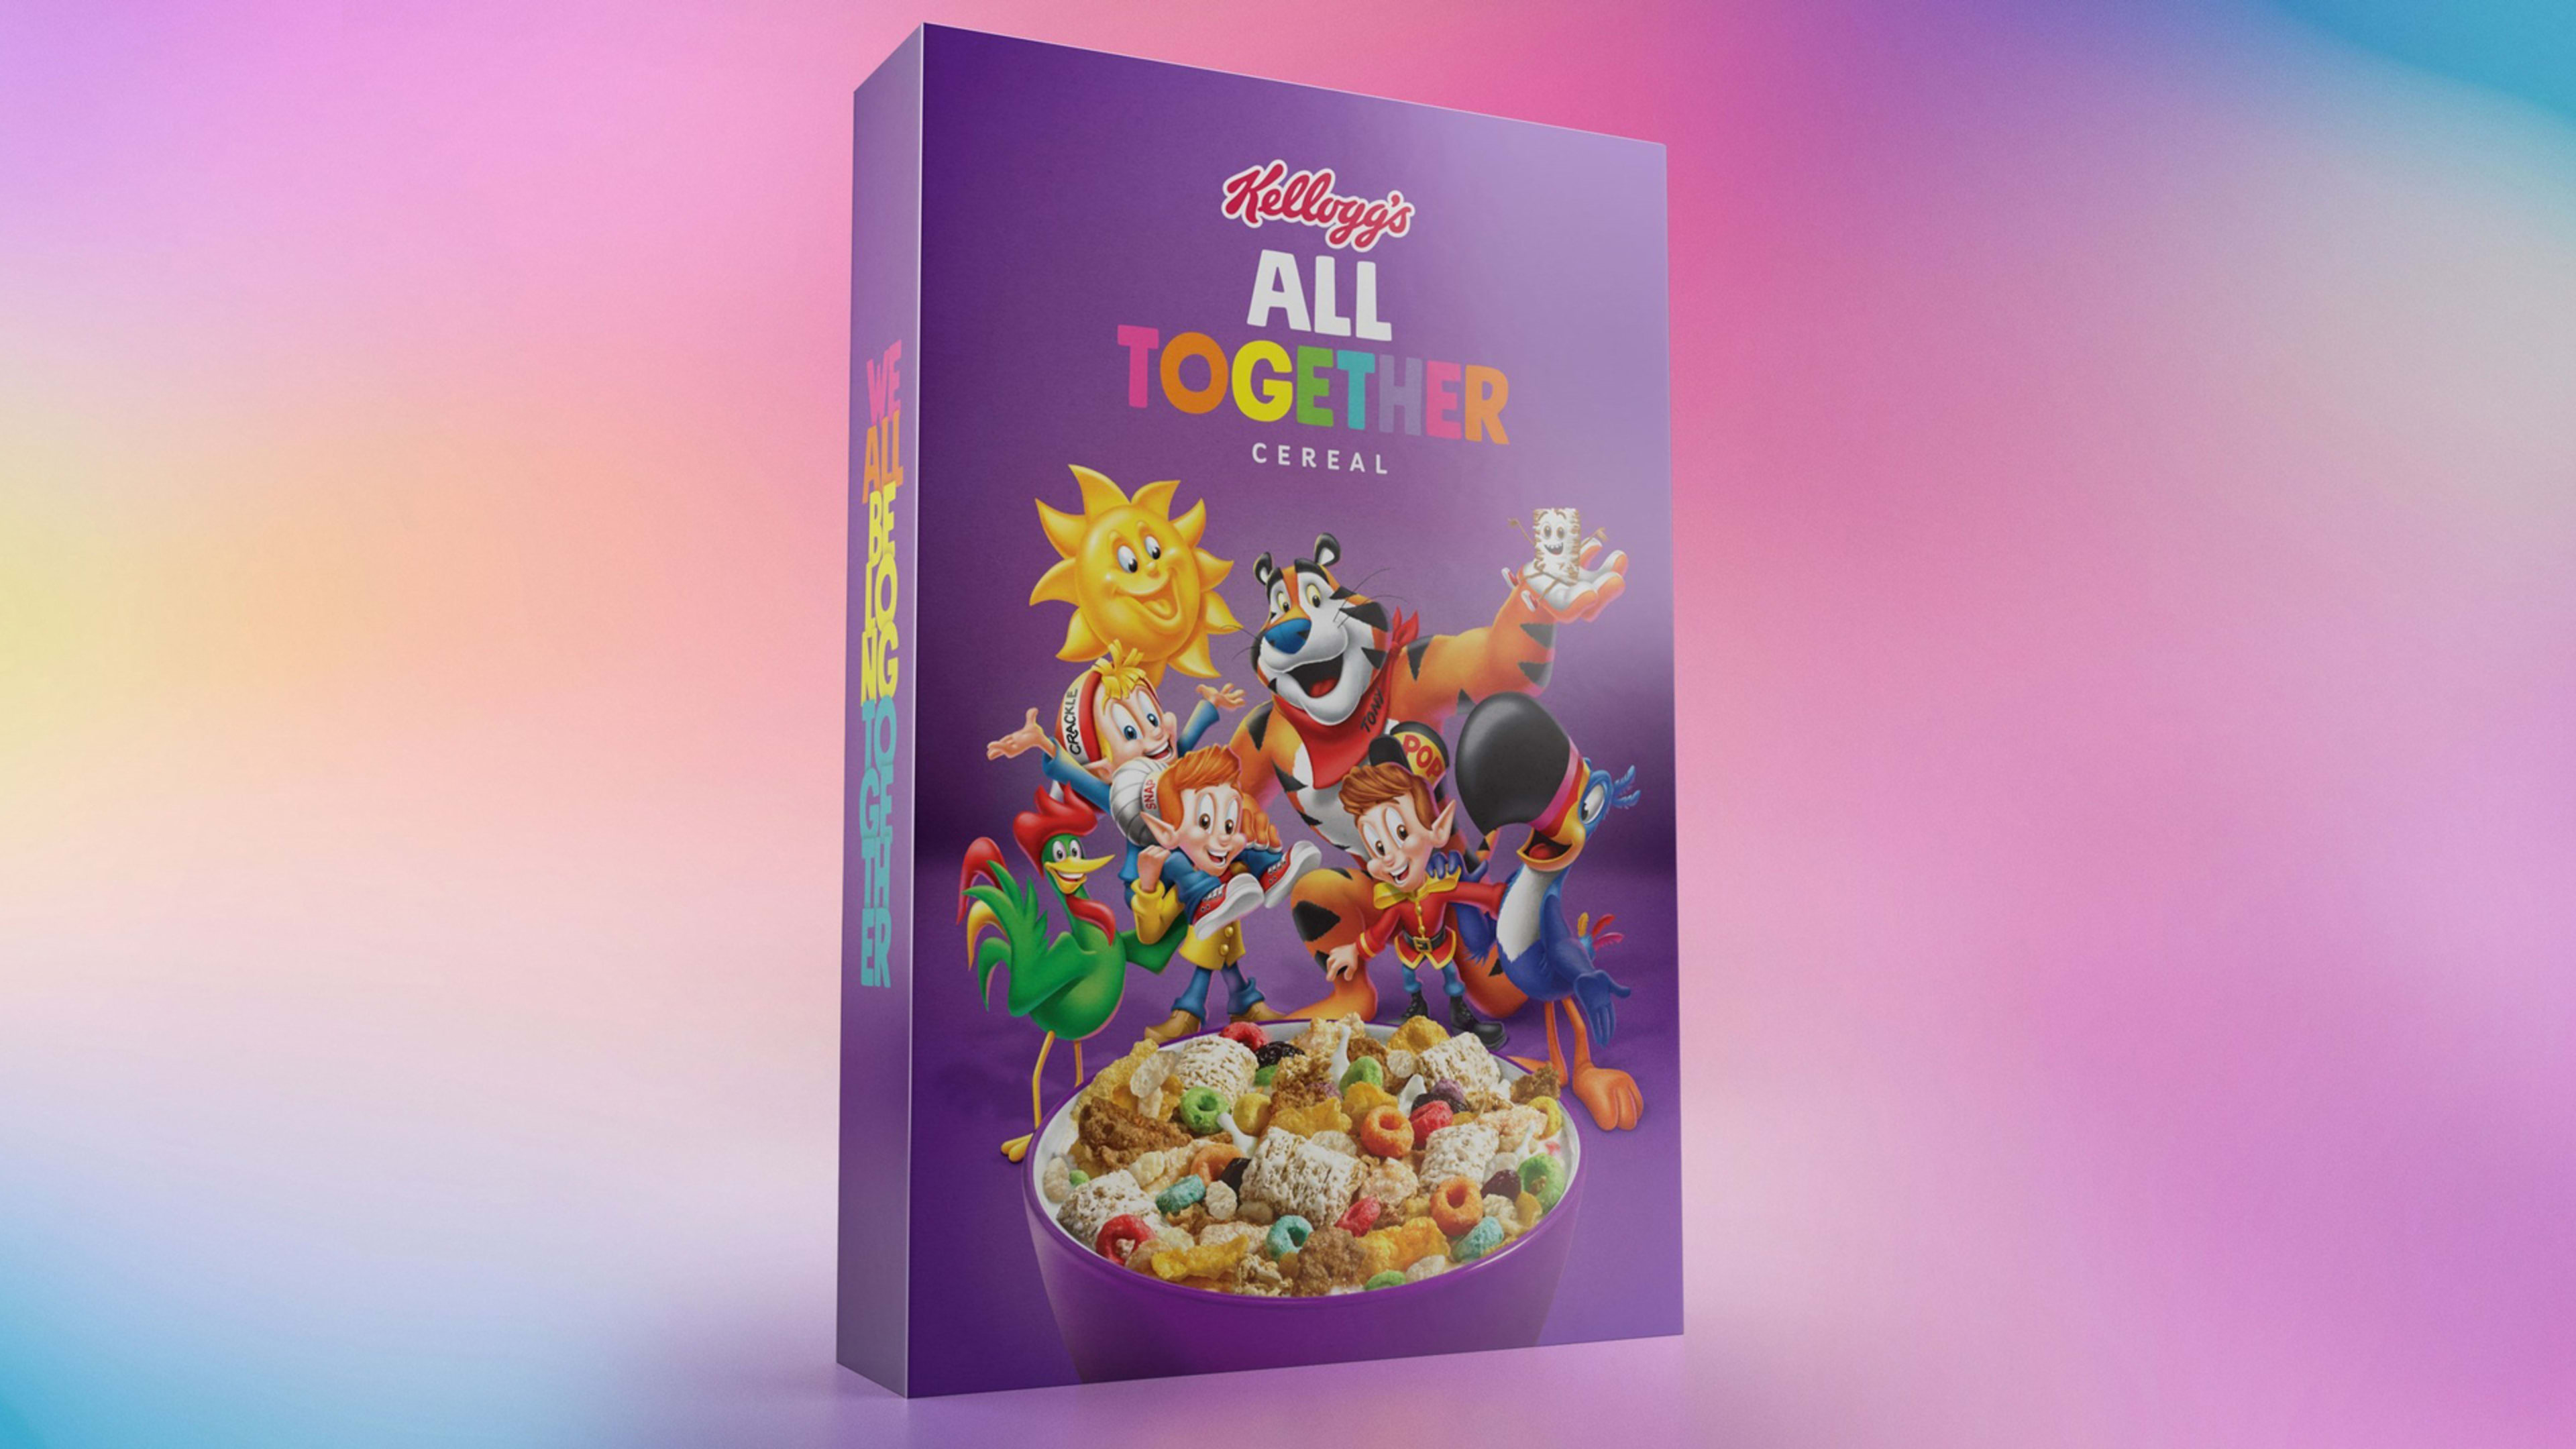 Kellogg’s new inclusion cereal features 6 cereals and 6 mascots